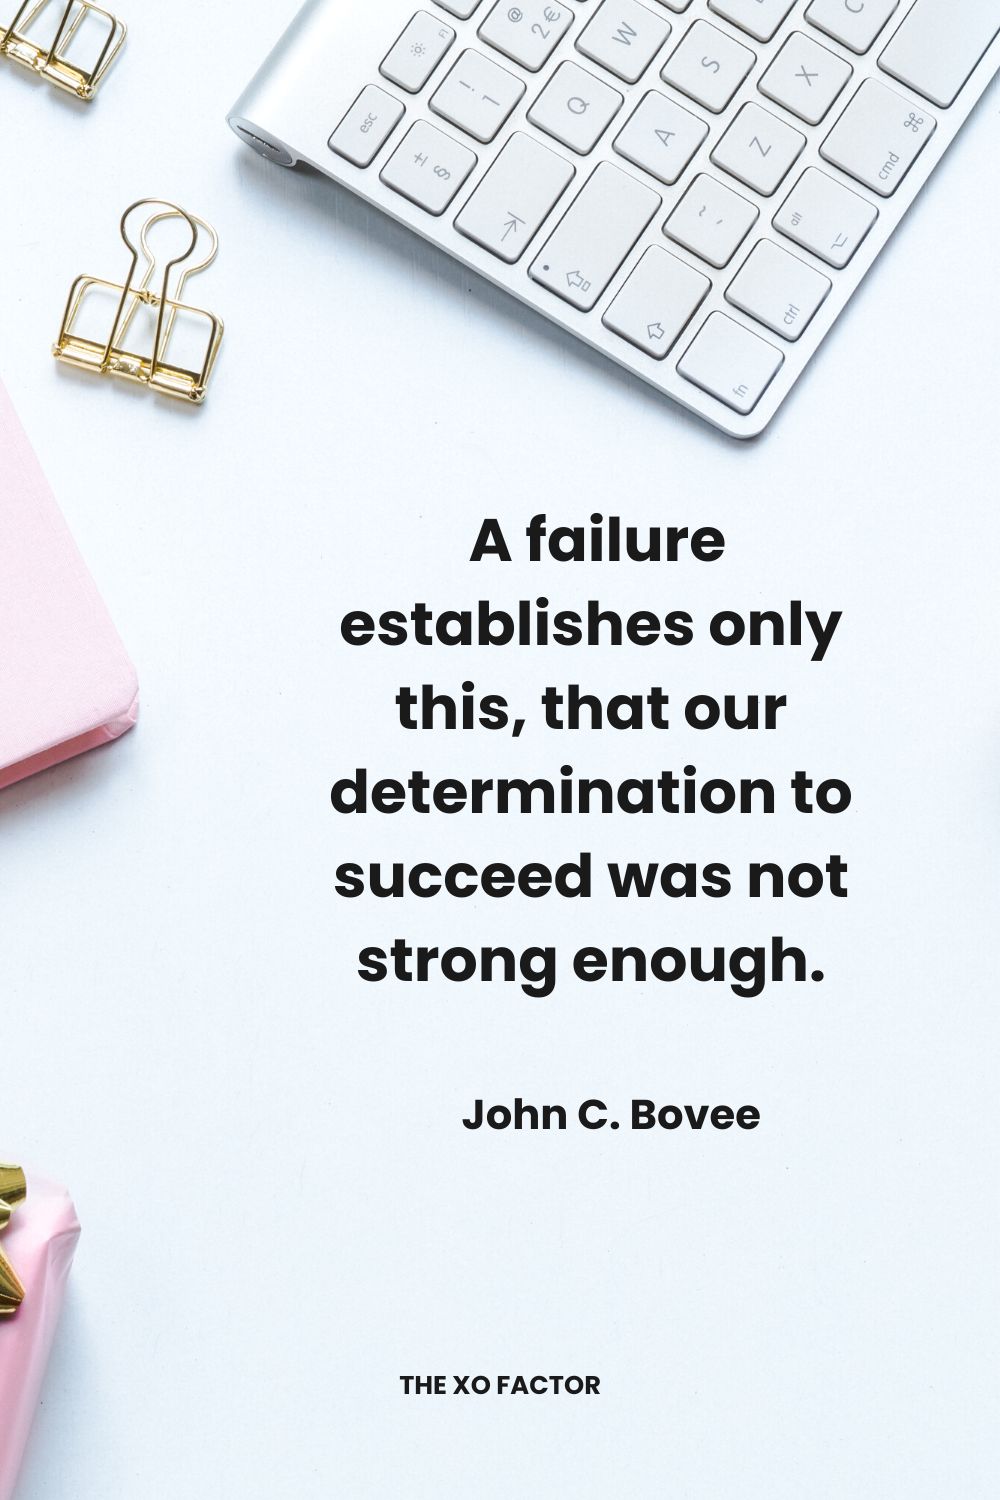 A failure establishes only this, that our determination to succeed was not strong enough. John C. Bovee